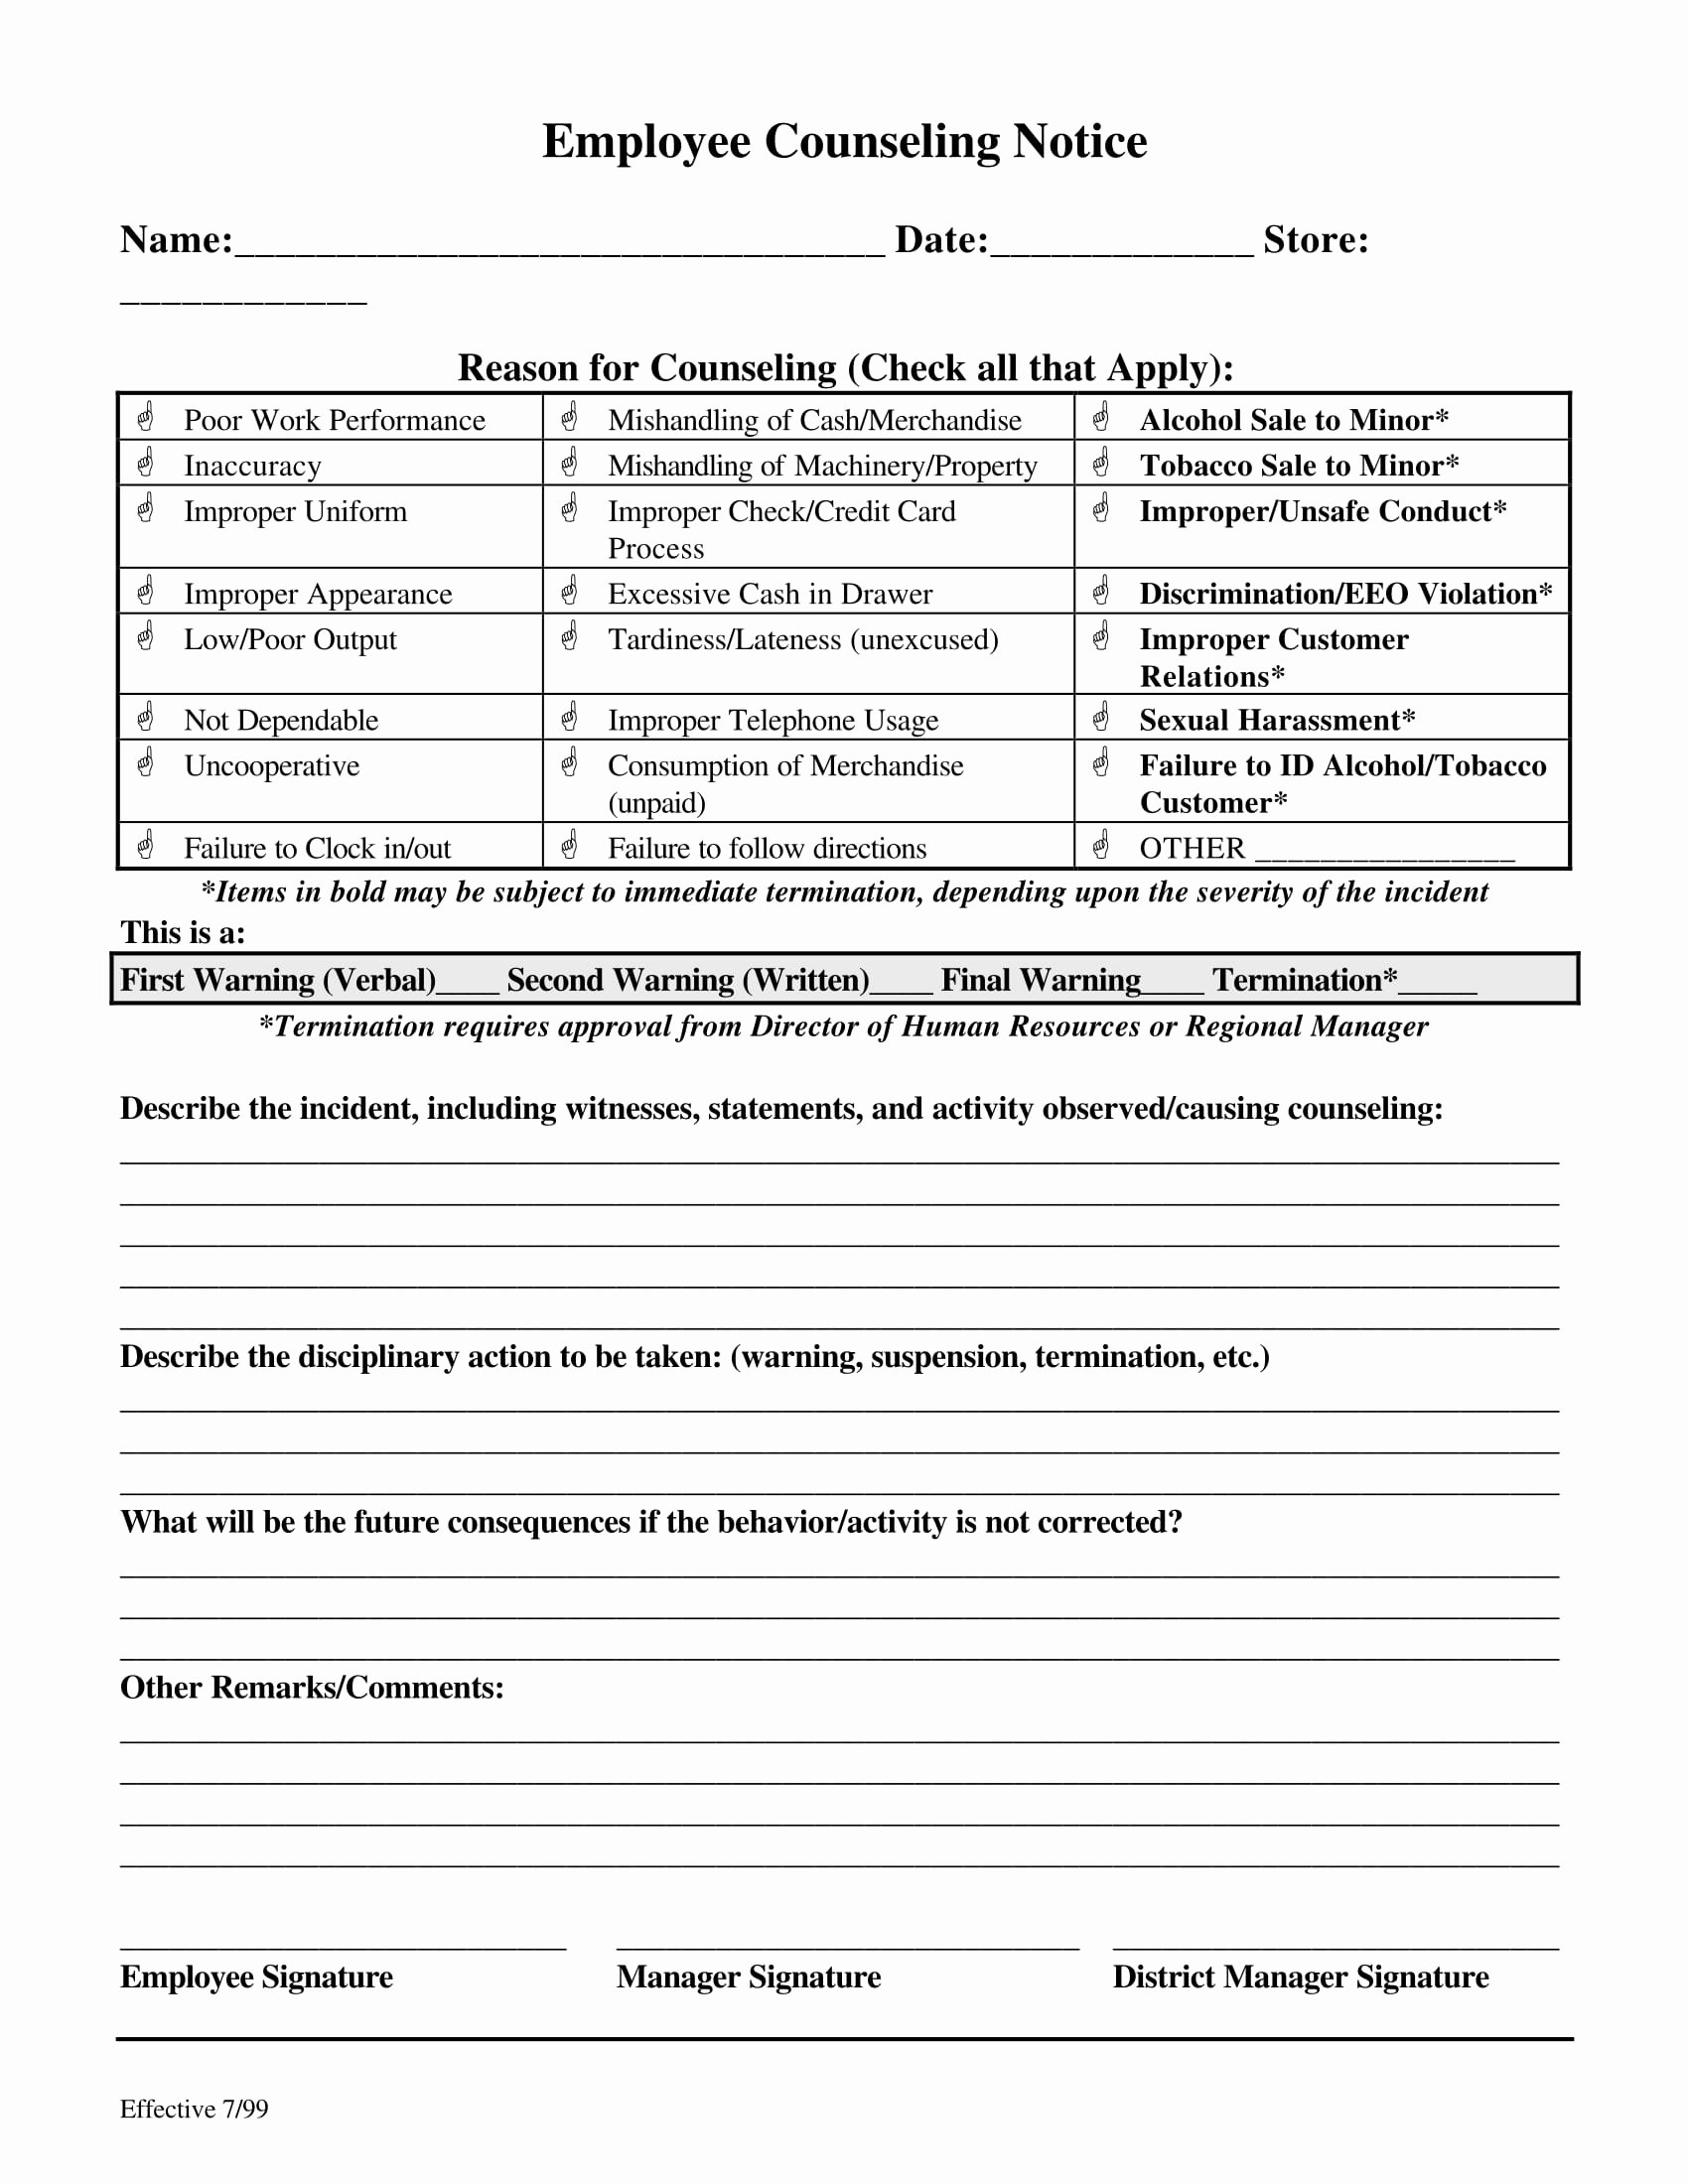 Employee Counseling form Elegant Free 14 Counseling Statement form Samples